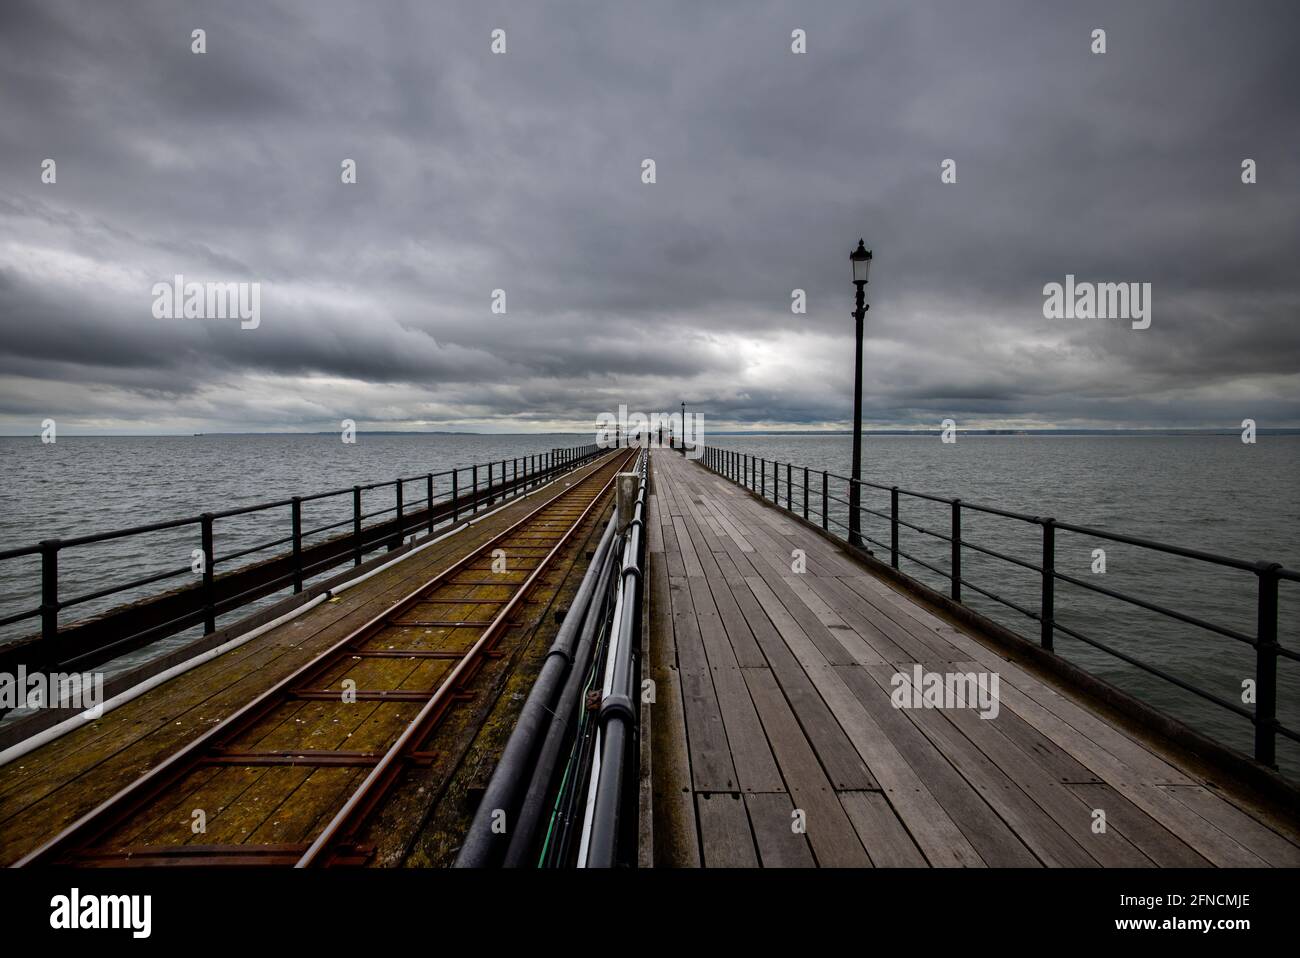 Southend on Sea Essex England UK 15 May 2021 Southend Pier at just over one and a quarter miles long is the longest pleasure pier in the world.  South Stock Photo